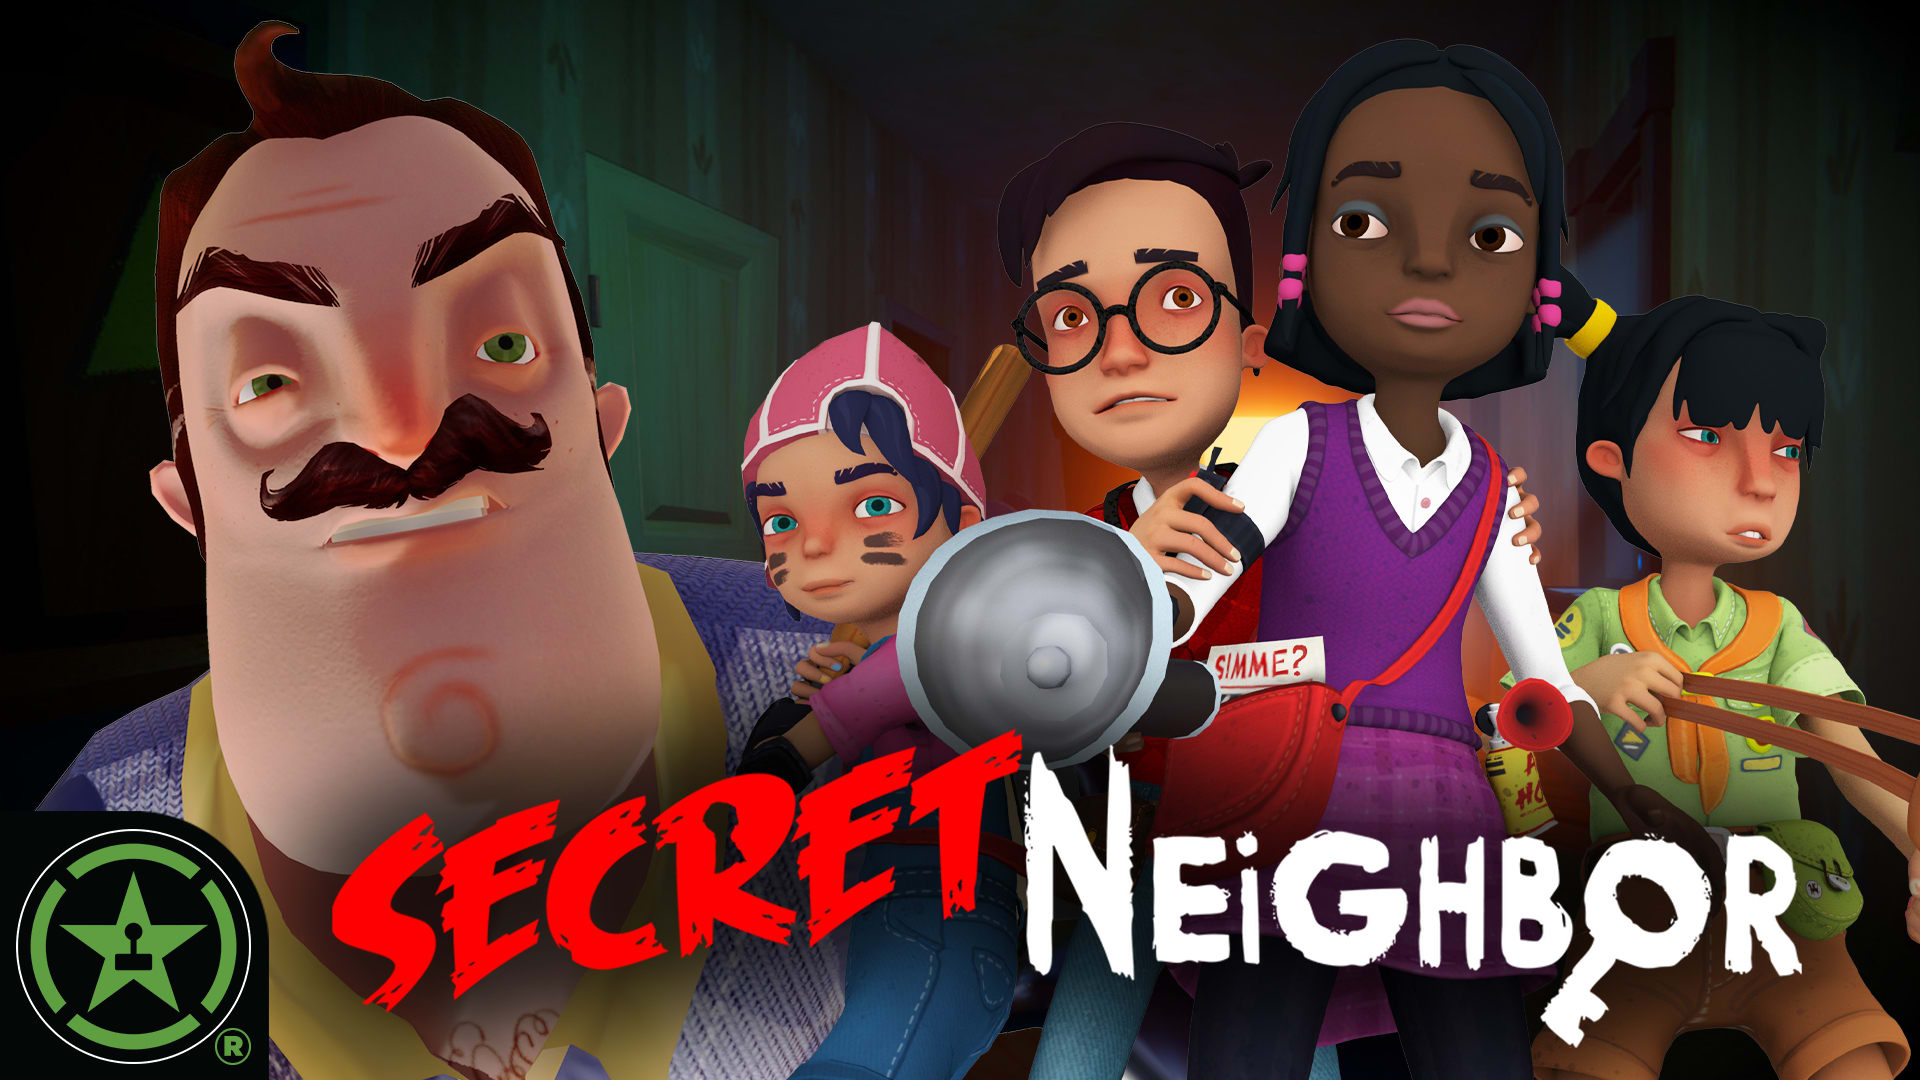 Secret Neighbor lets you betray your friends in a fun social